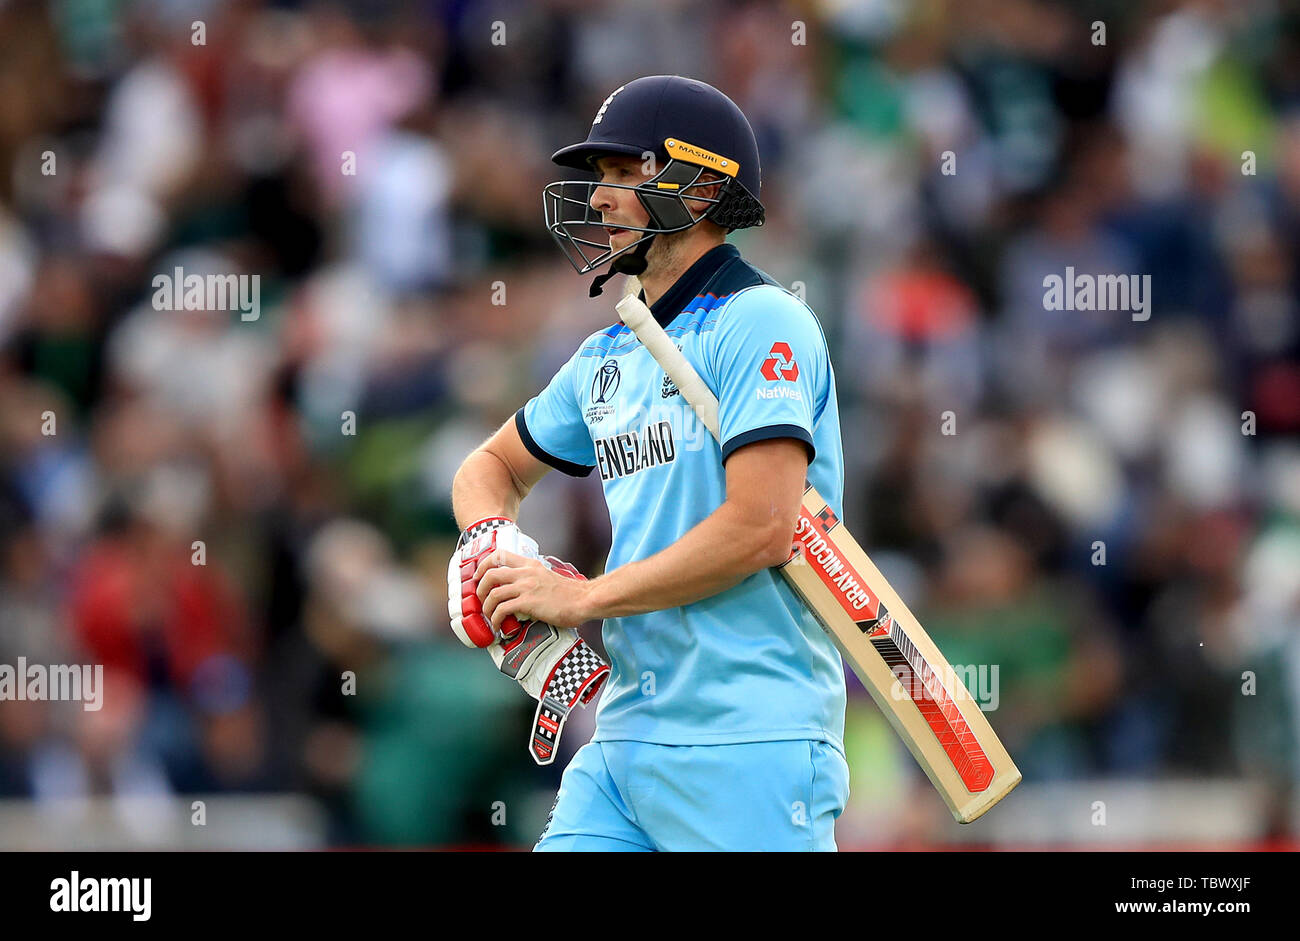 England's Chris Woakes walks off after being dismissed during the ICC Cricket World Cup group stage match at Trent Bridge, Nottingham. Stock Photo